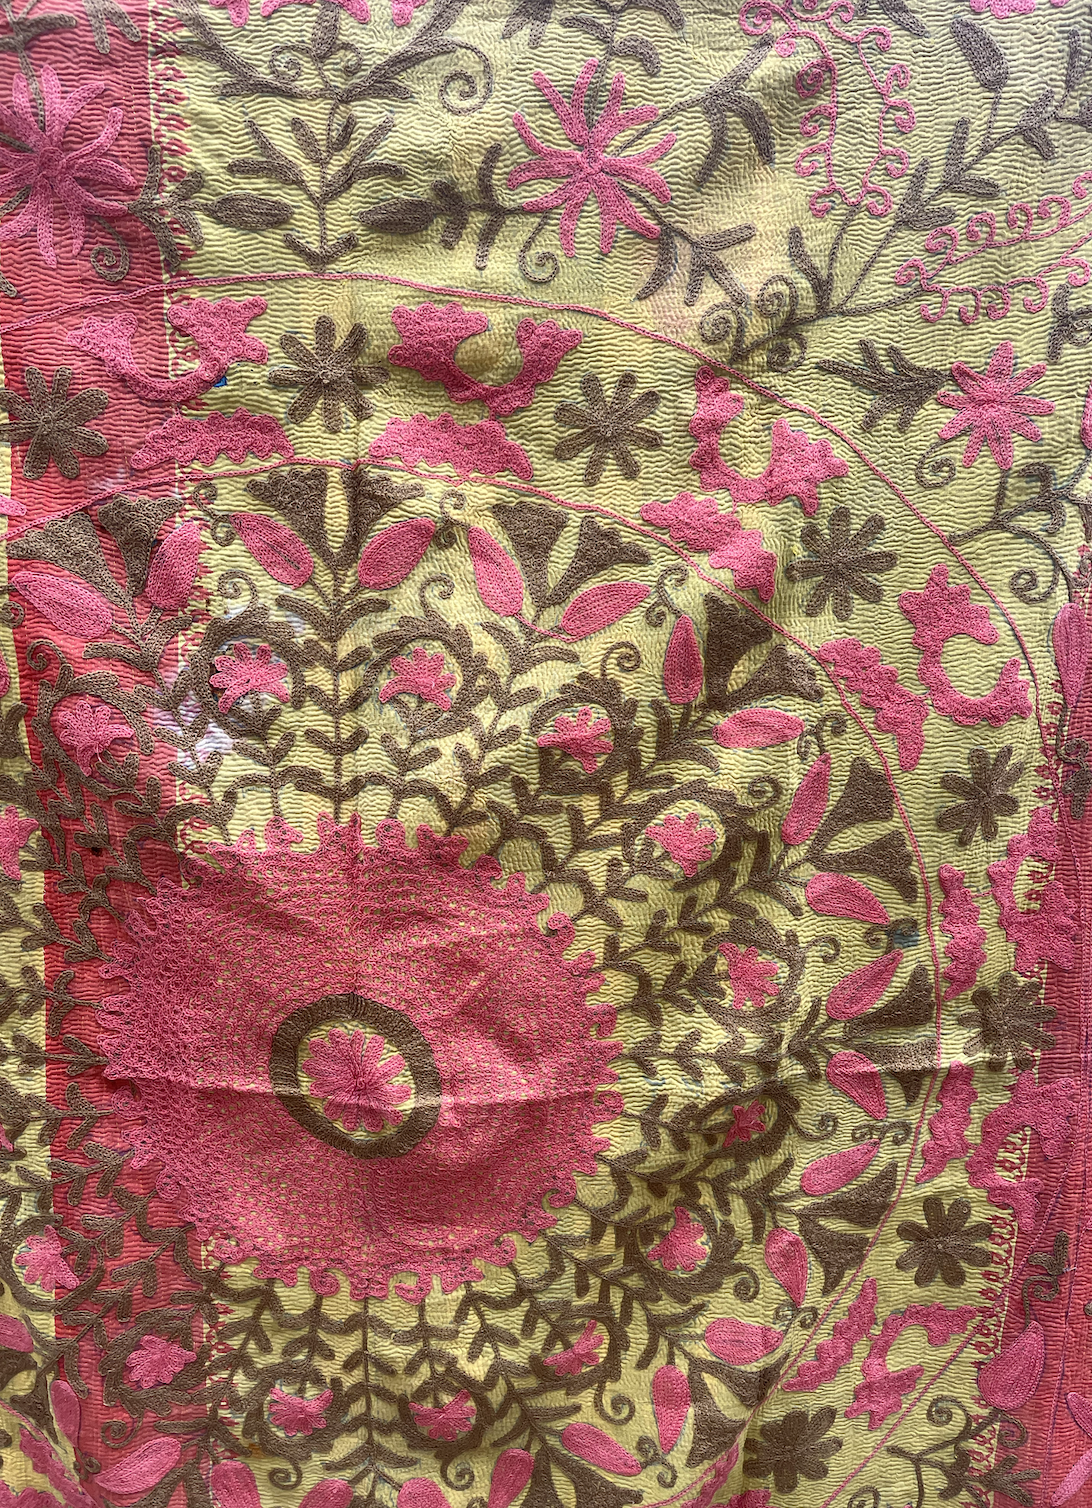 Bold Yellow & Pink Embroidered Cotton Kantha Quilt